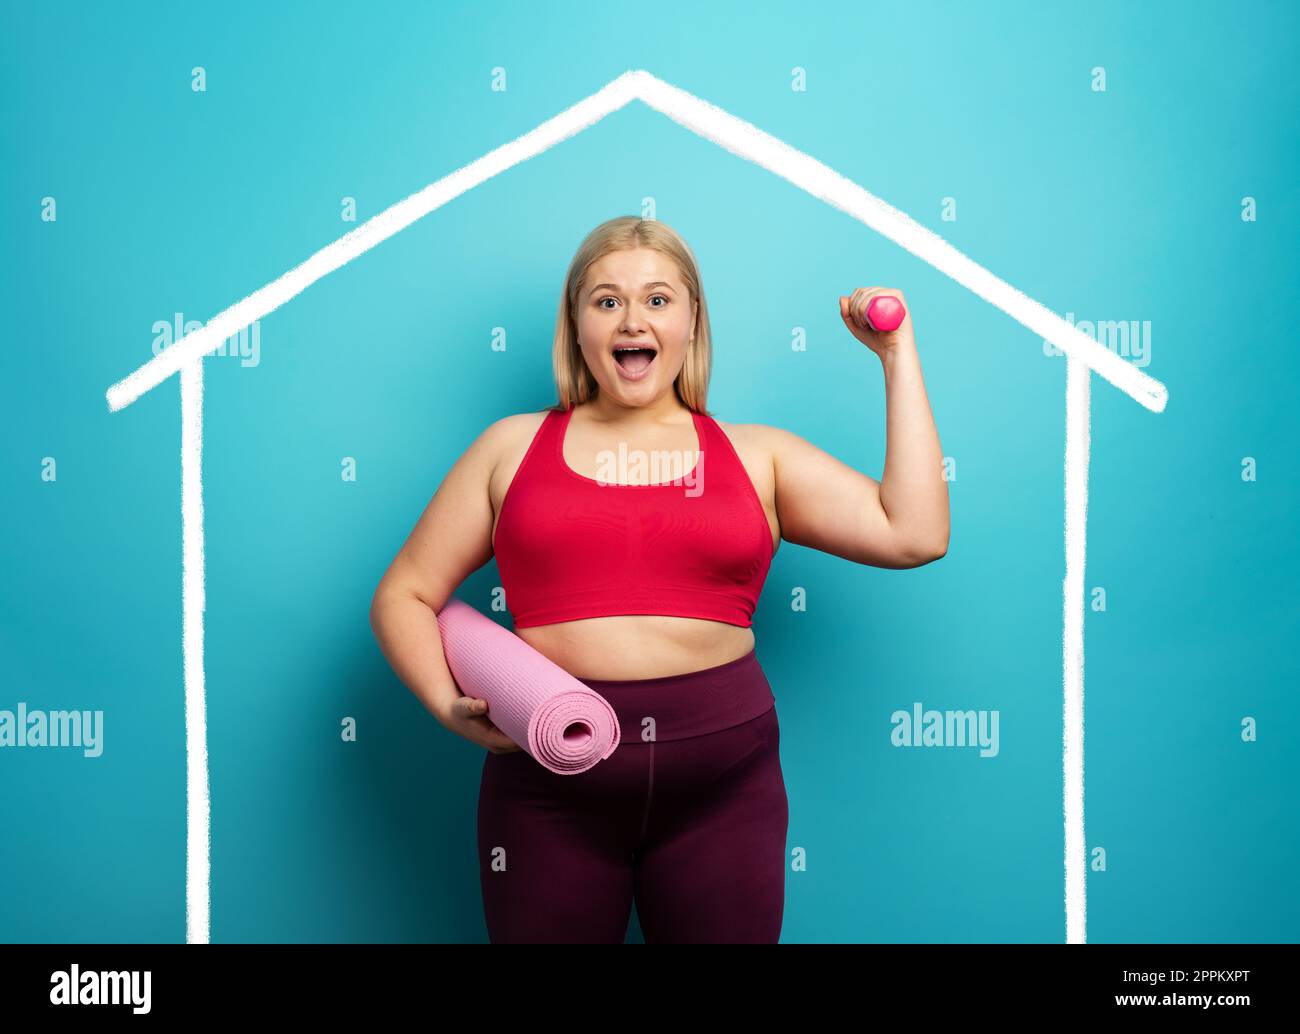 Fat girl does gym at home. satisfied expression. Cyan background Stock Photo